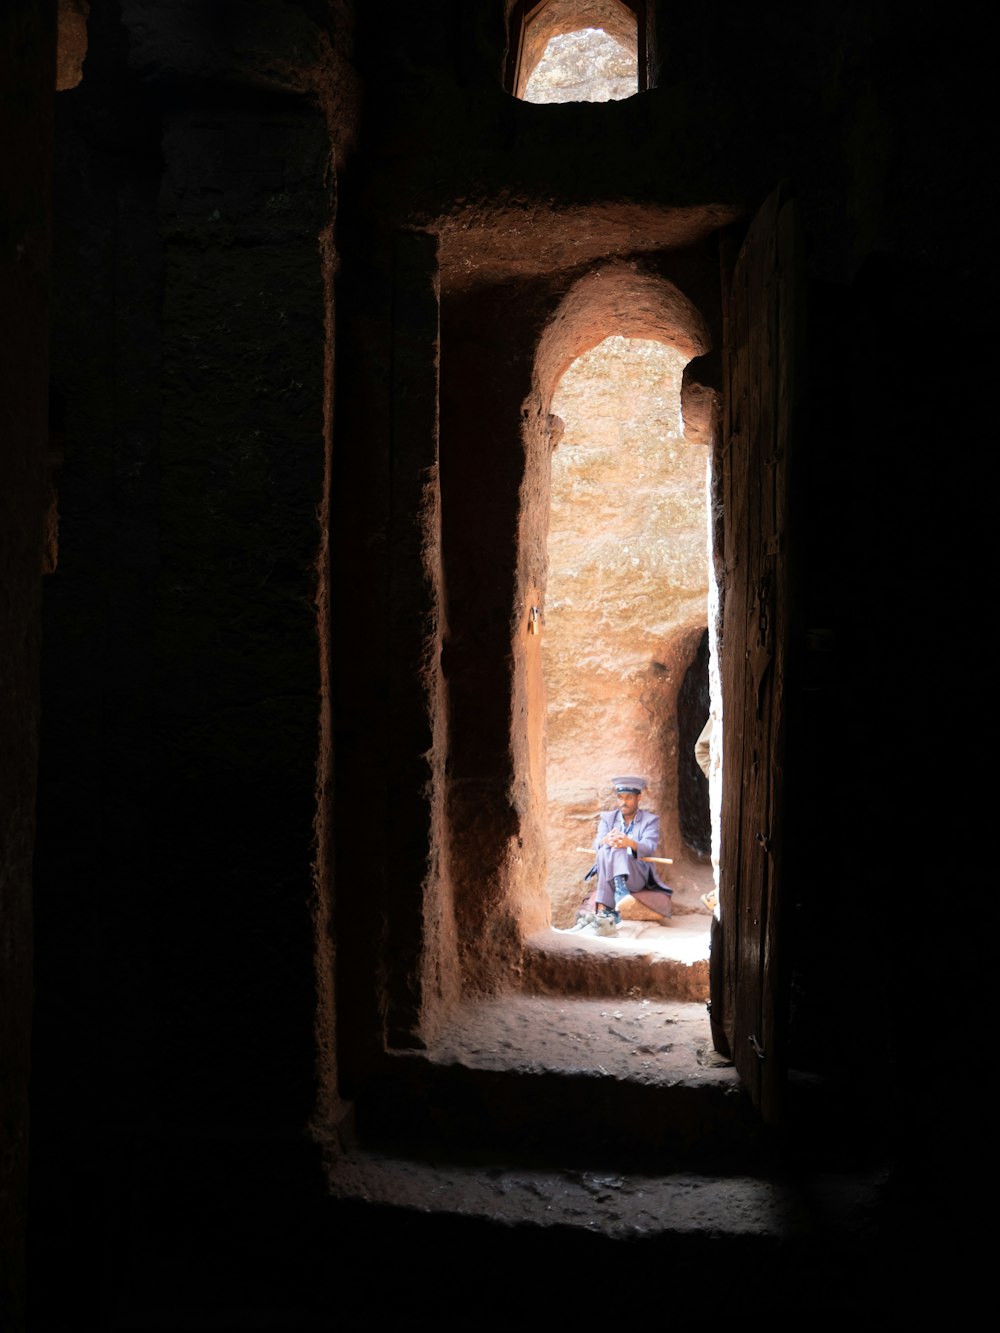 a man sitting in a doorway of a stone building